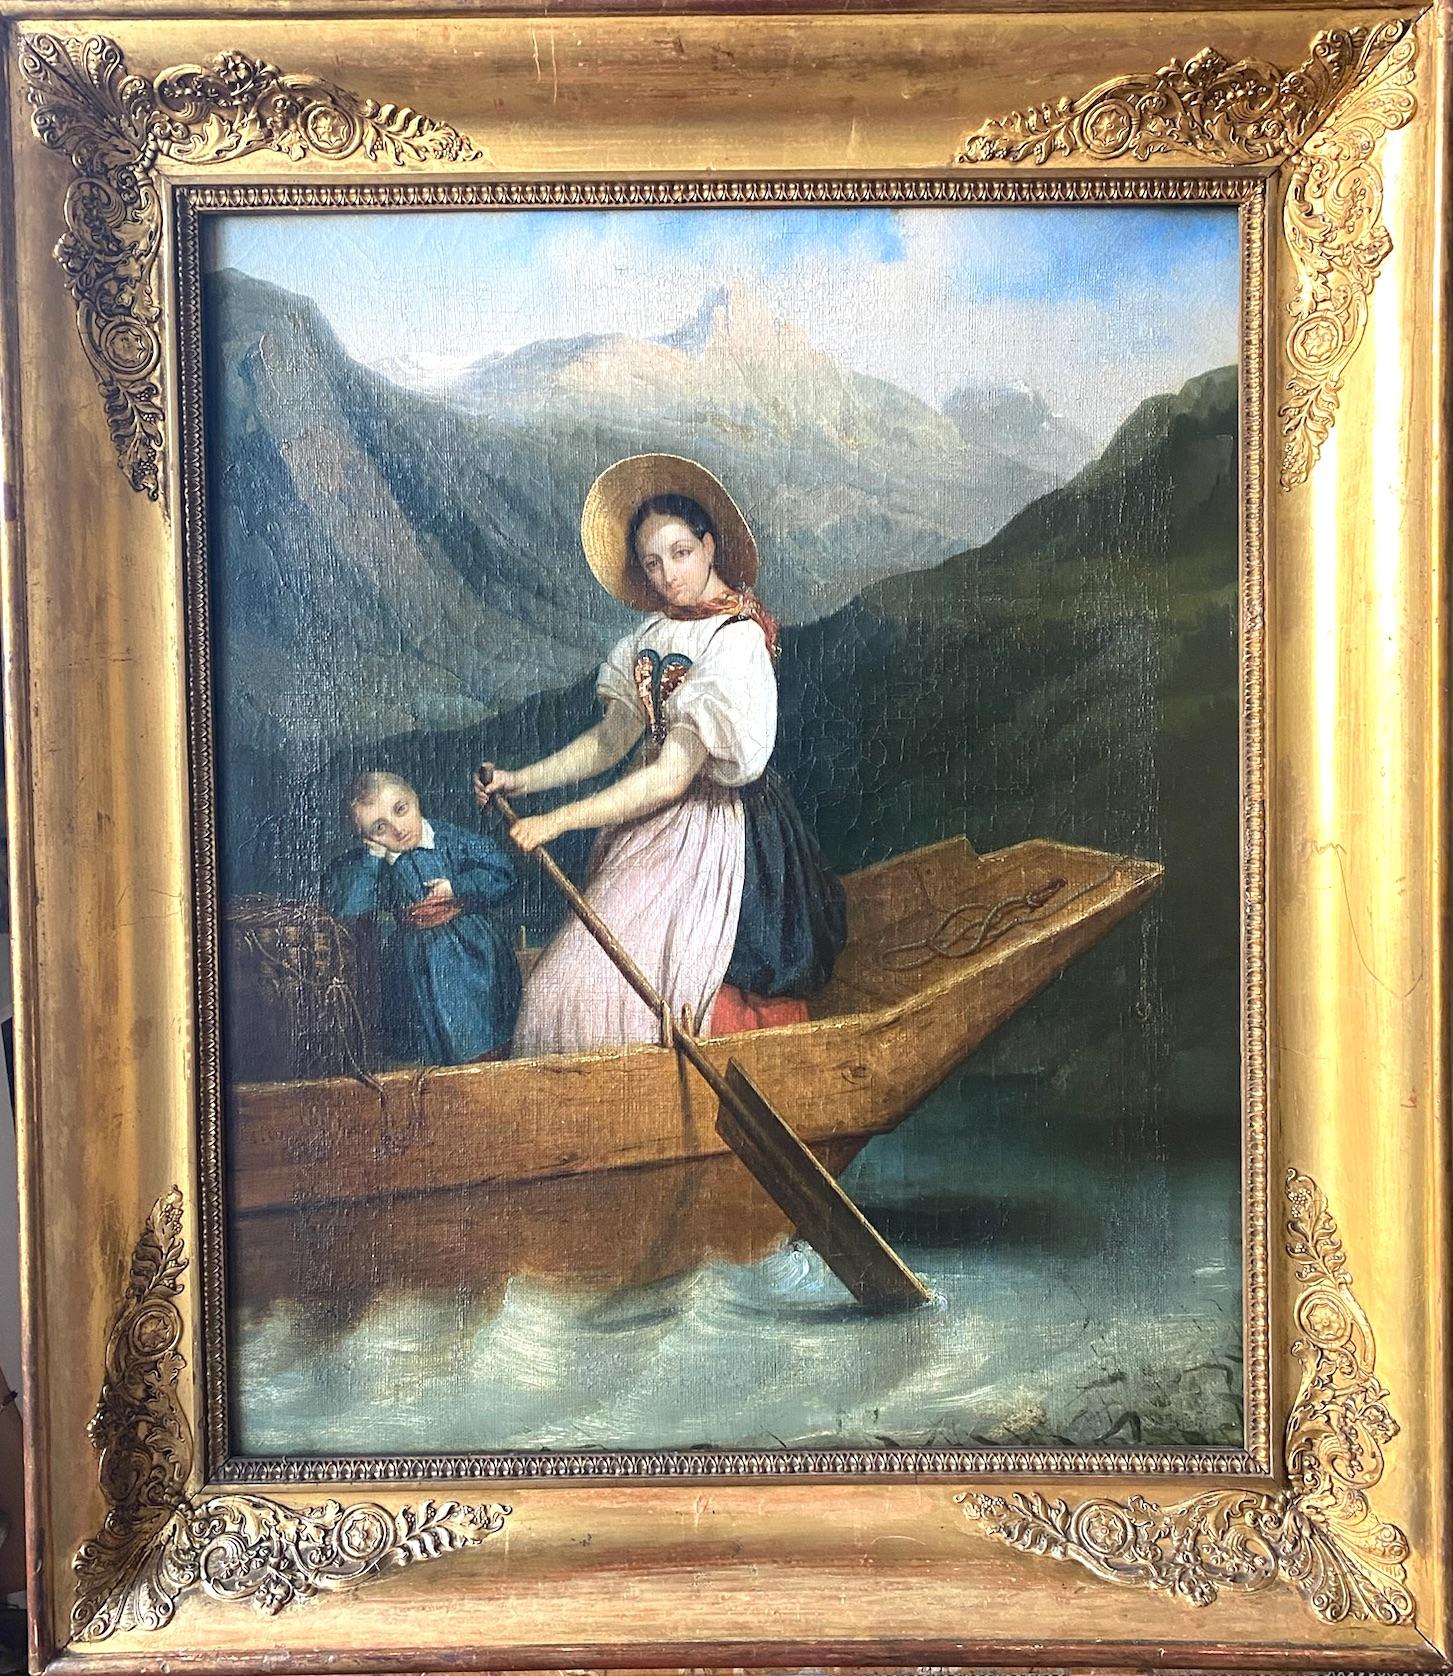 Here is an almost two hundred year old painting which is so irresistibly charming that it's crazy! You may have seen painted landscapes, portraits, genre scenes - but how many pretty lady skippers on a mountain lake? Dating from circa 1830, termed